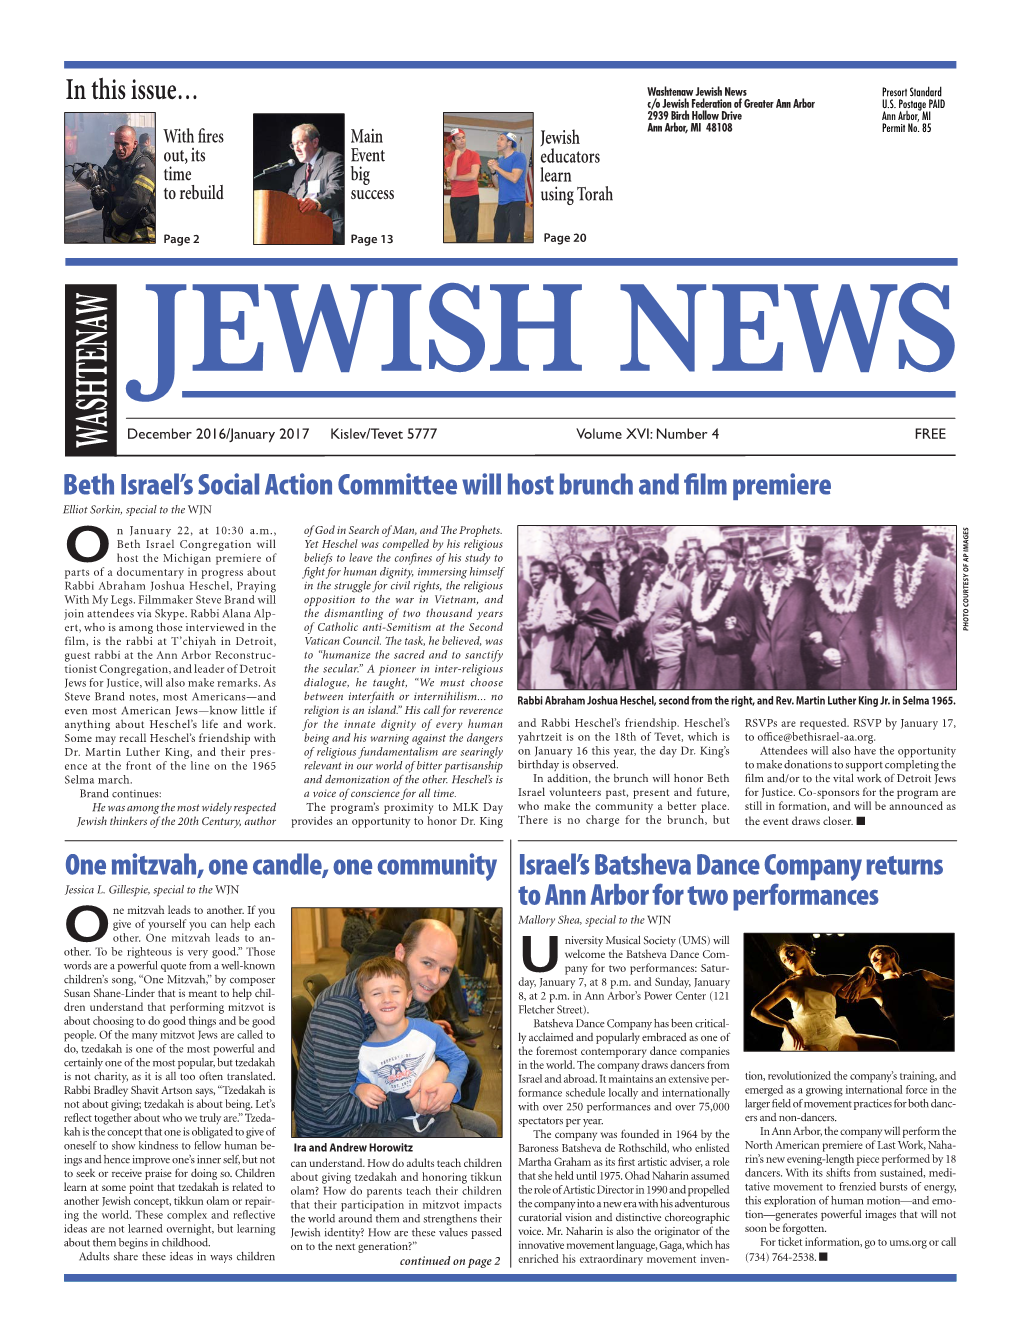 In This Issue… Beth Israel's Social Action Committee Will Host Brunch